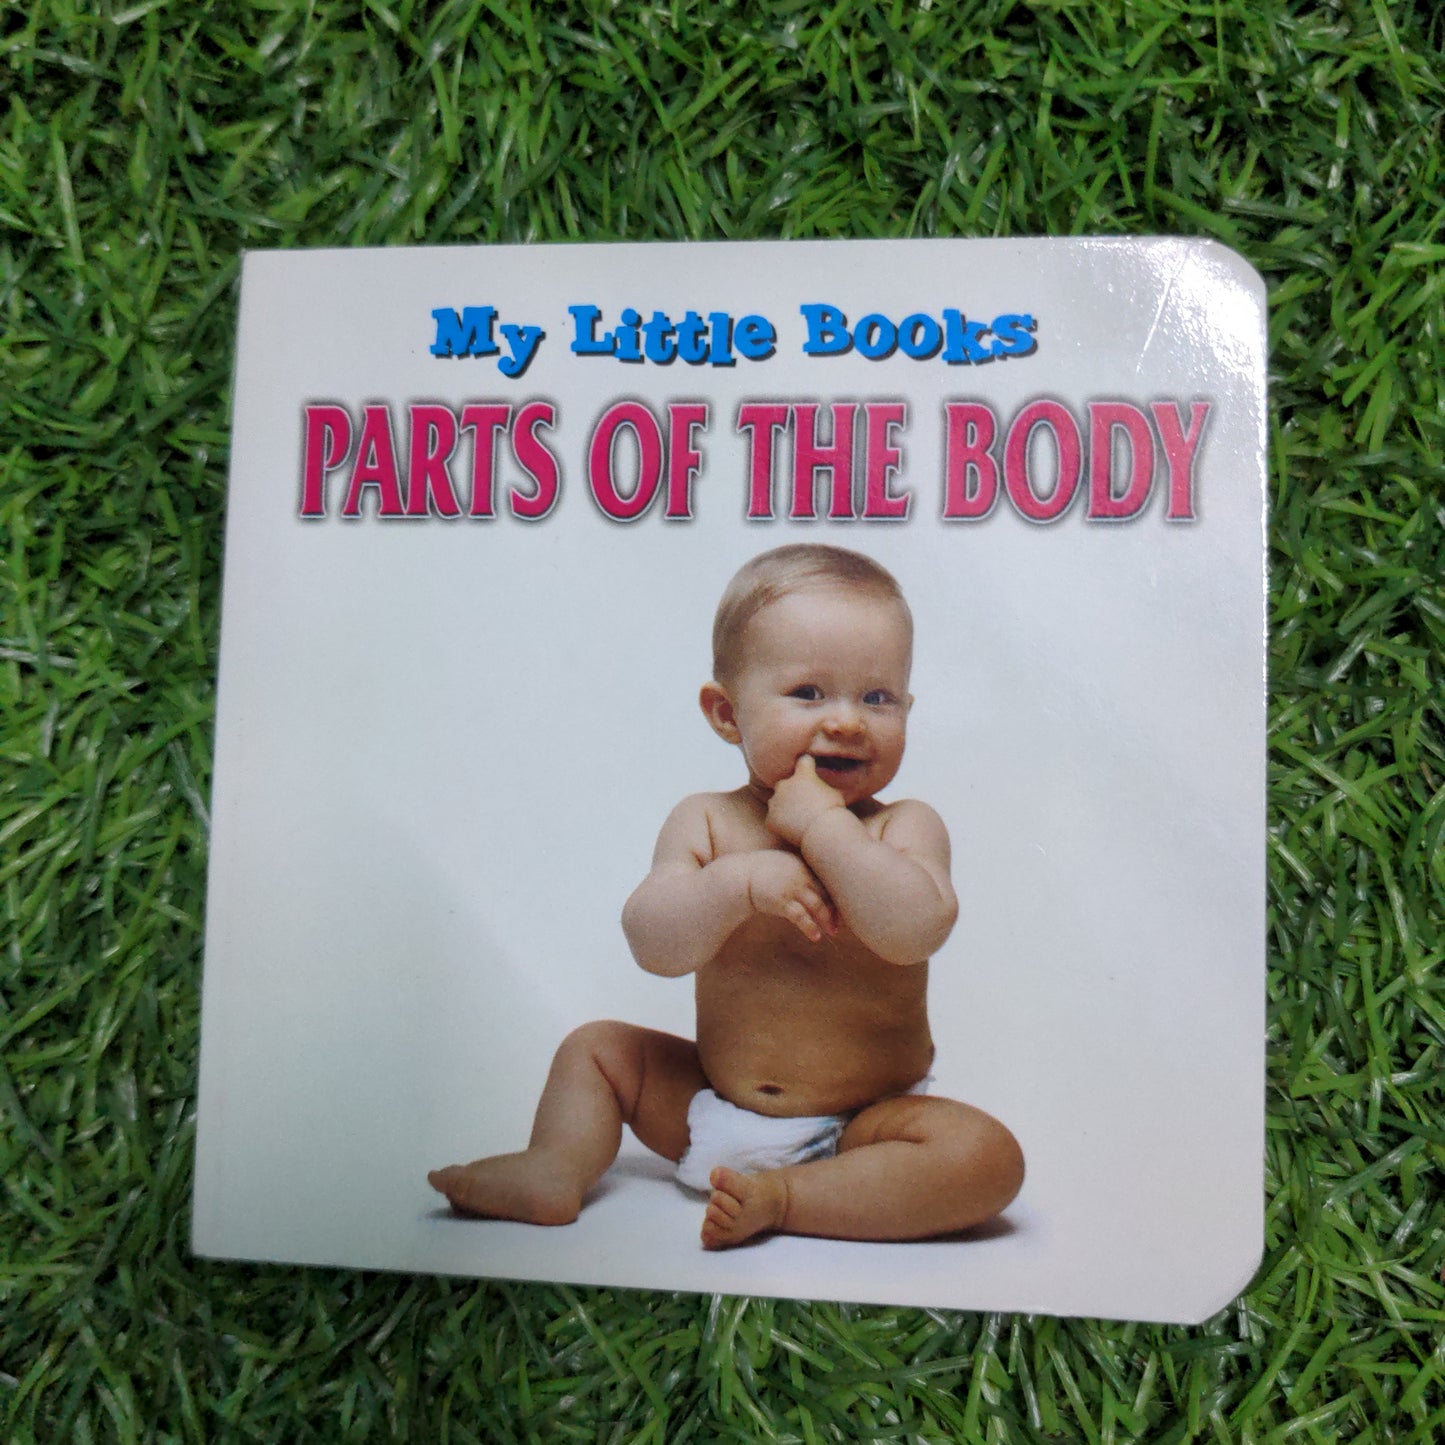 My Little Board book - Parts of the Body